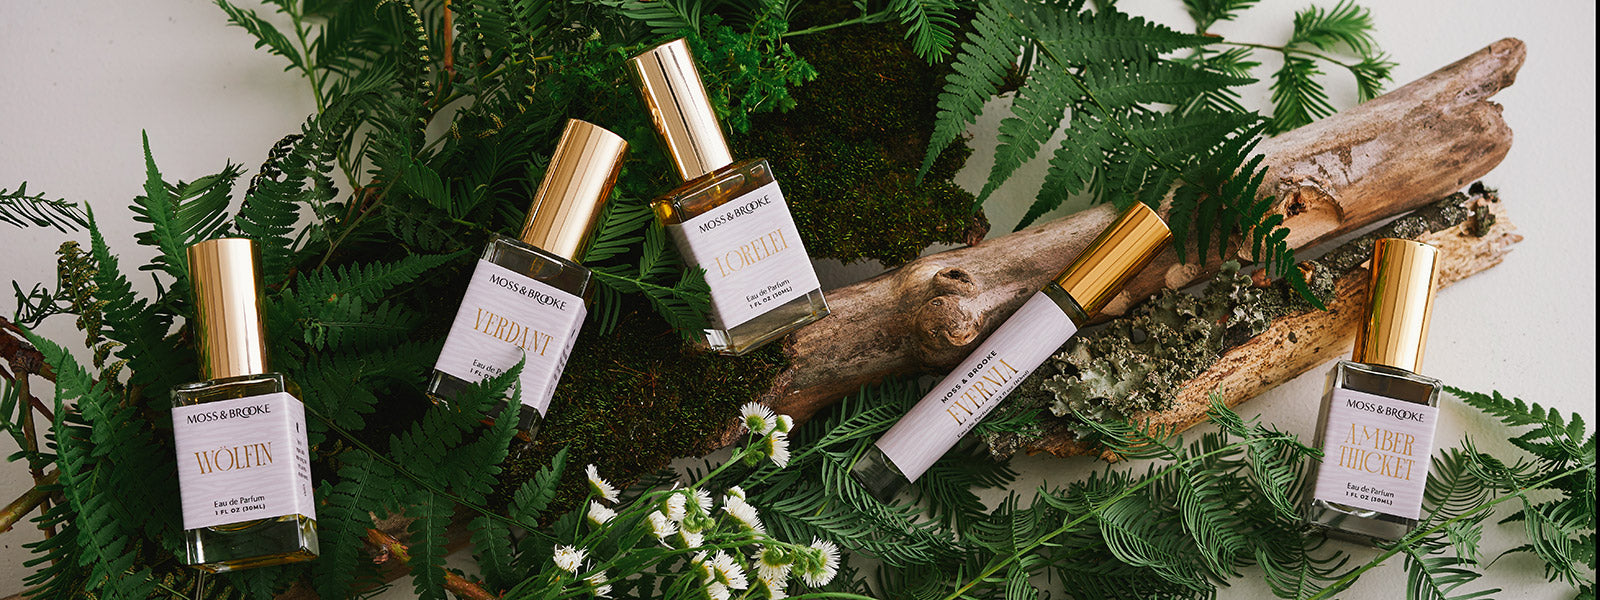 Moss & Brooke full range of botanical inspired fragrance with minimal packaging and gold foil.